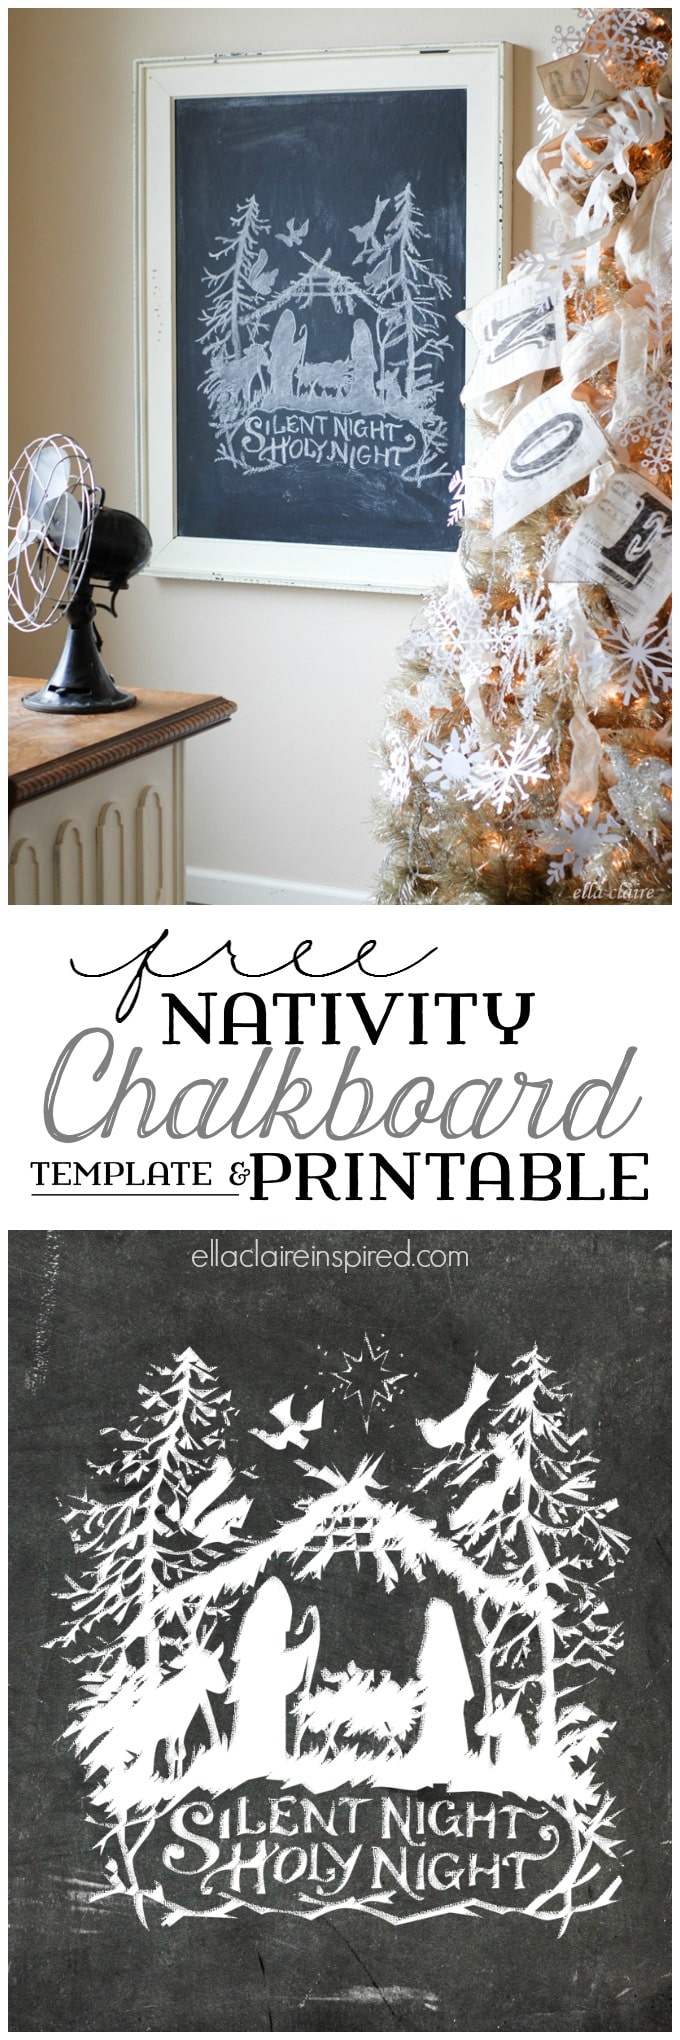 Print the Chalkboard printable as-is or use the free template and tutorial to create your own Nativity Chalkboard Art!